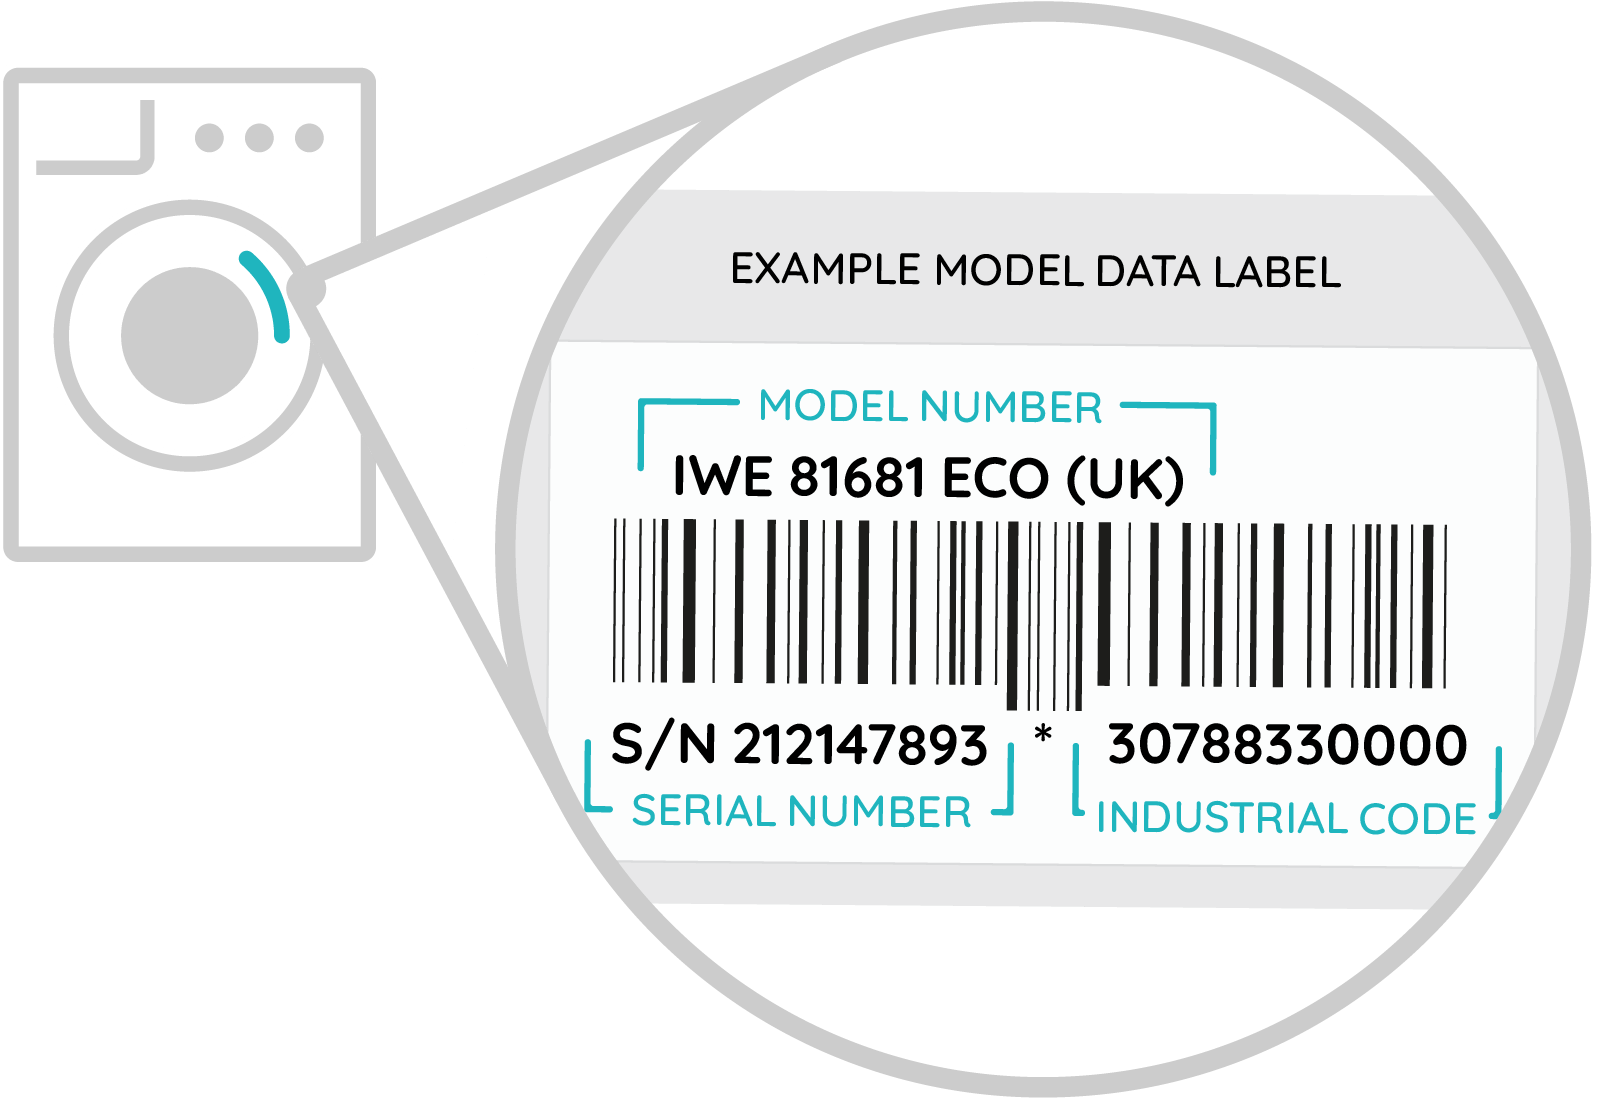 Find your serial number